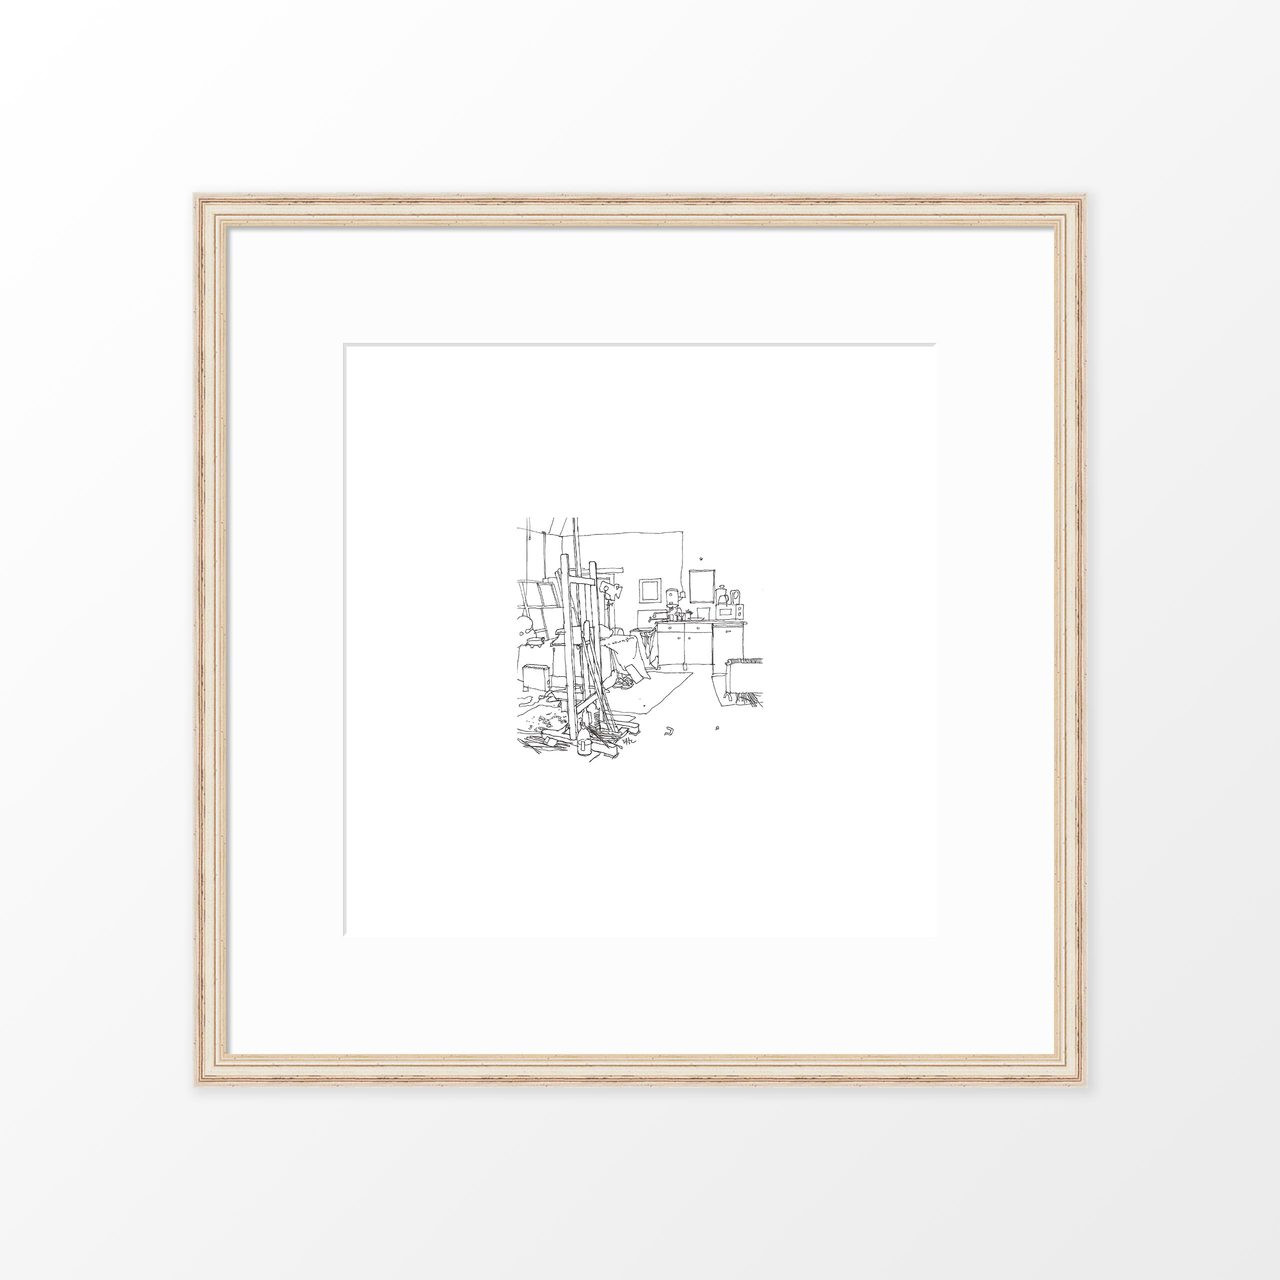 'Studio' Art Print (ink drawing by David Cobley) from The Printed Home